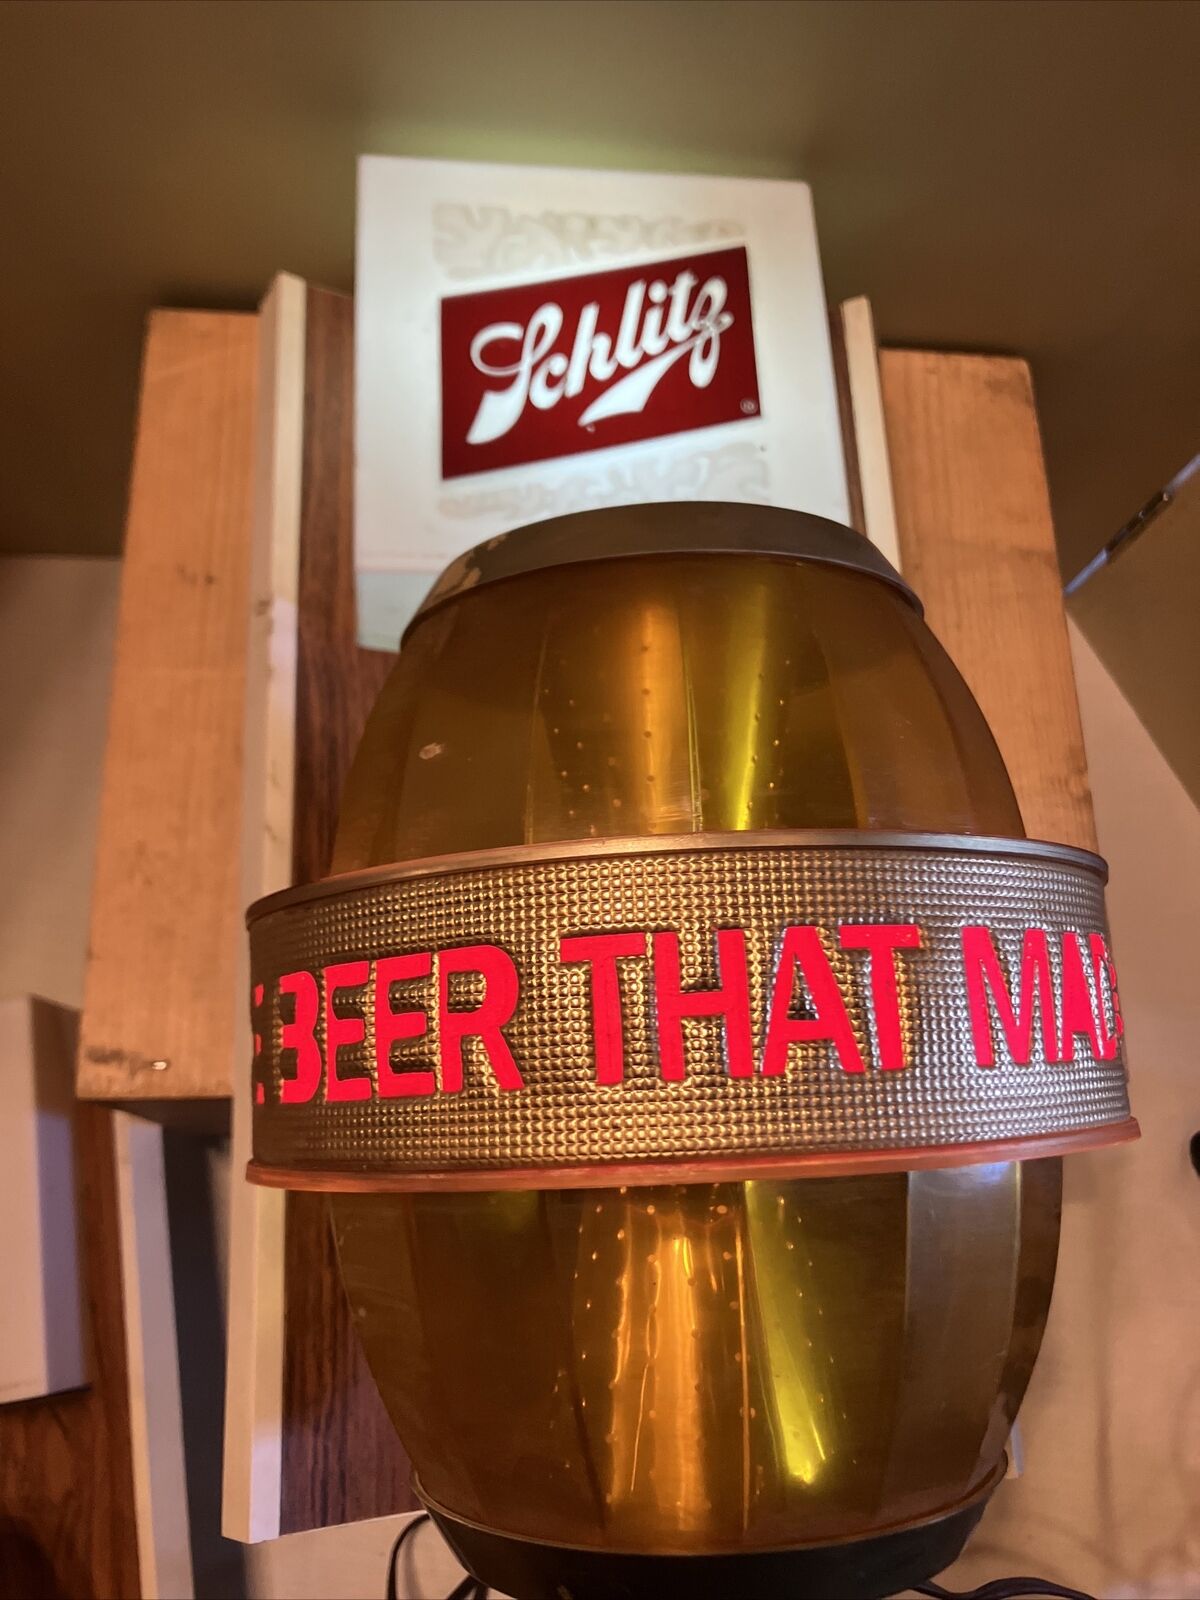 1965 Schlitz Barrel Motion Sign The Beer That Made Milwaukee Famous Sconce Light